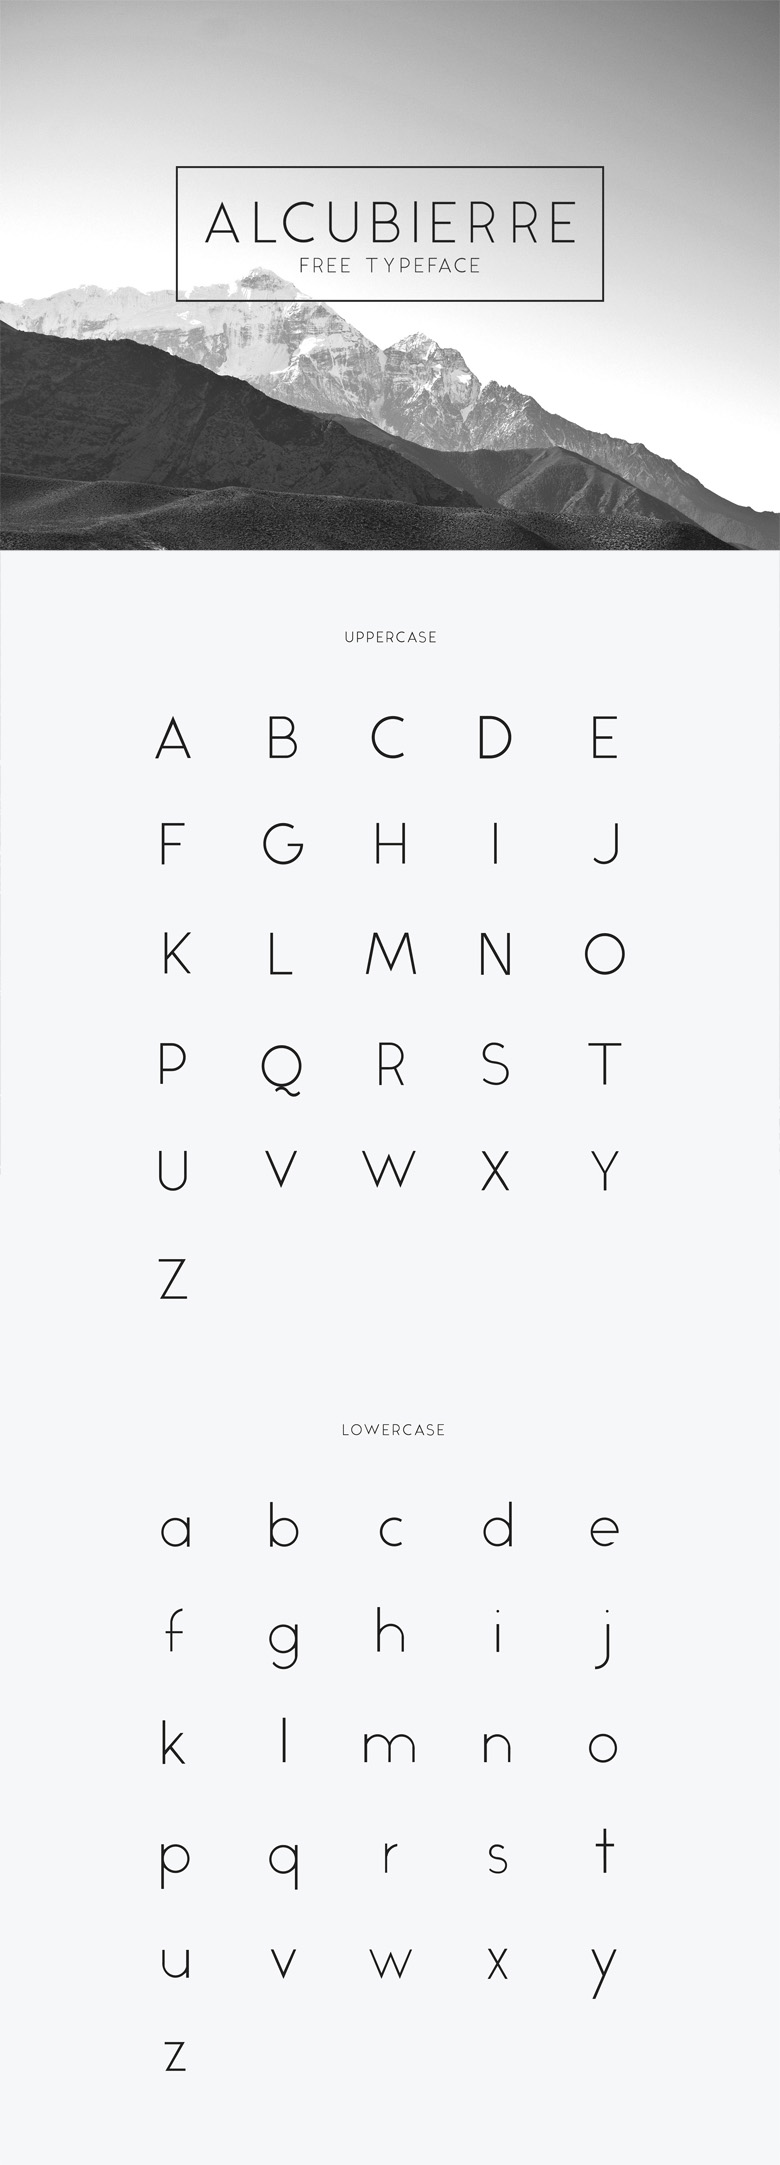 Beautiful free fonts for designers - Alcubierre